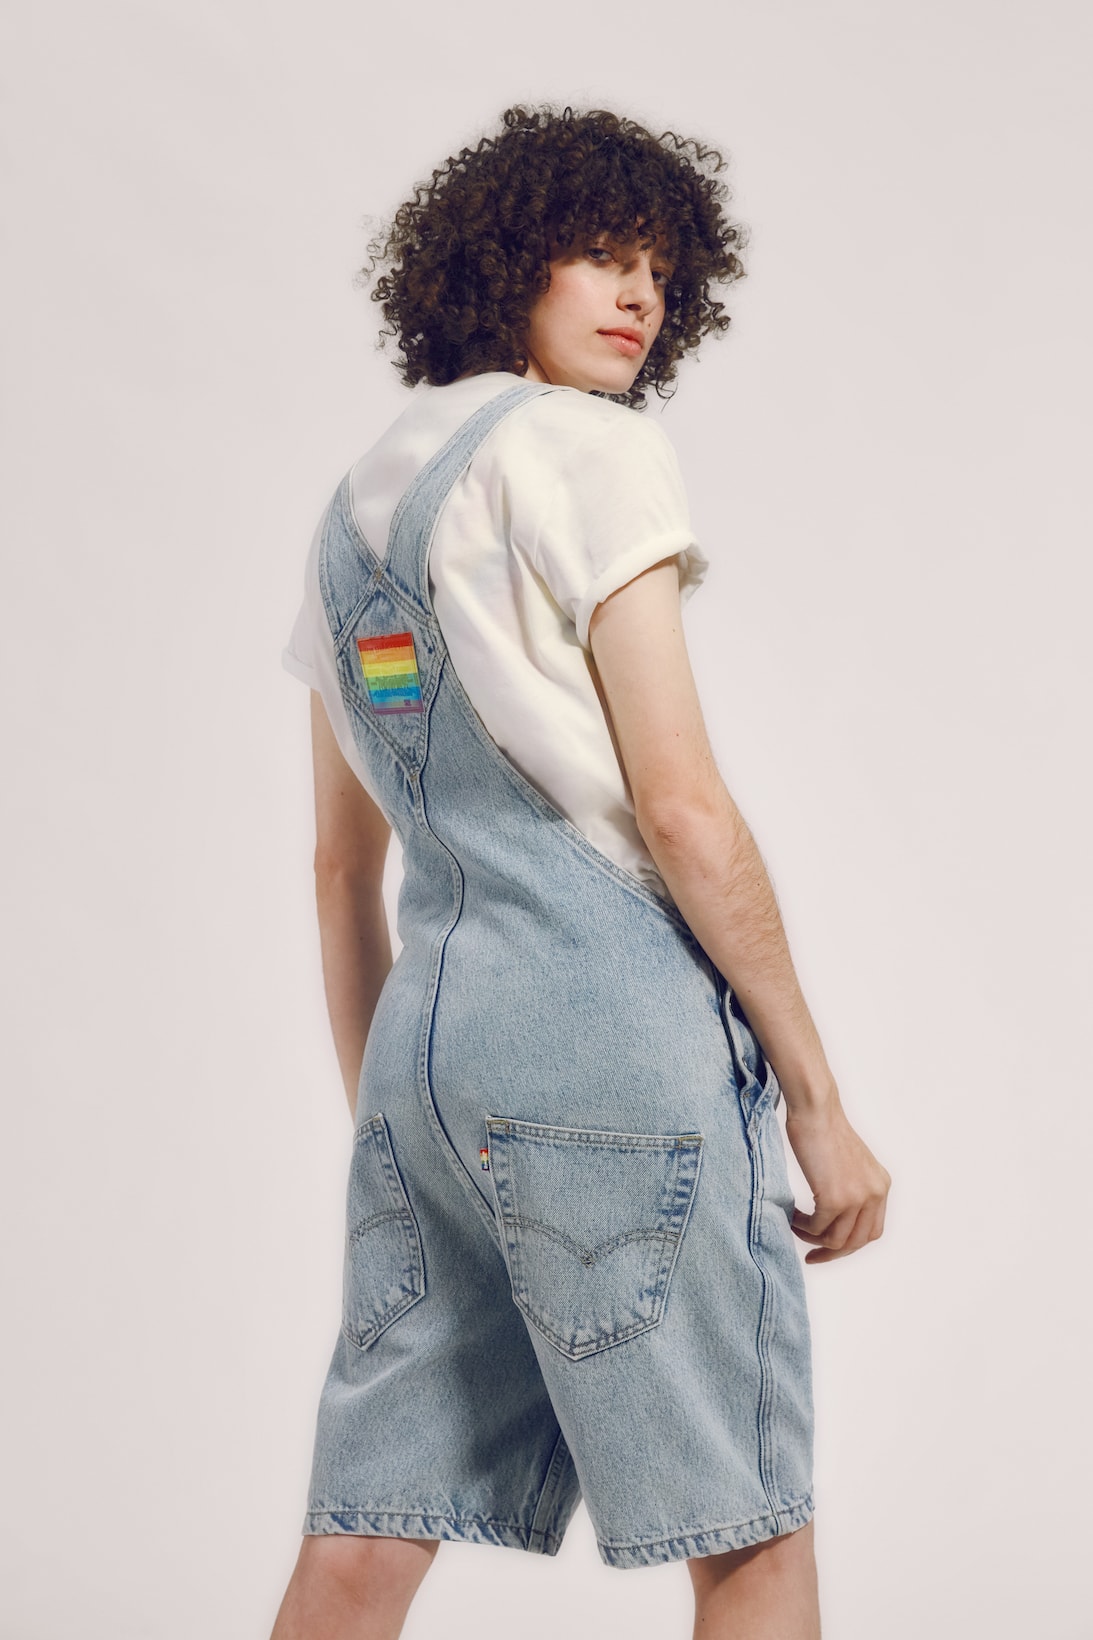 levis pride lgbtqia collection all pronouns love tee t shirt denim overall